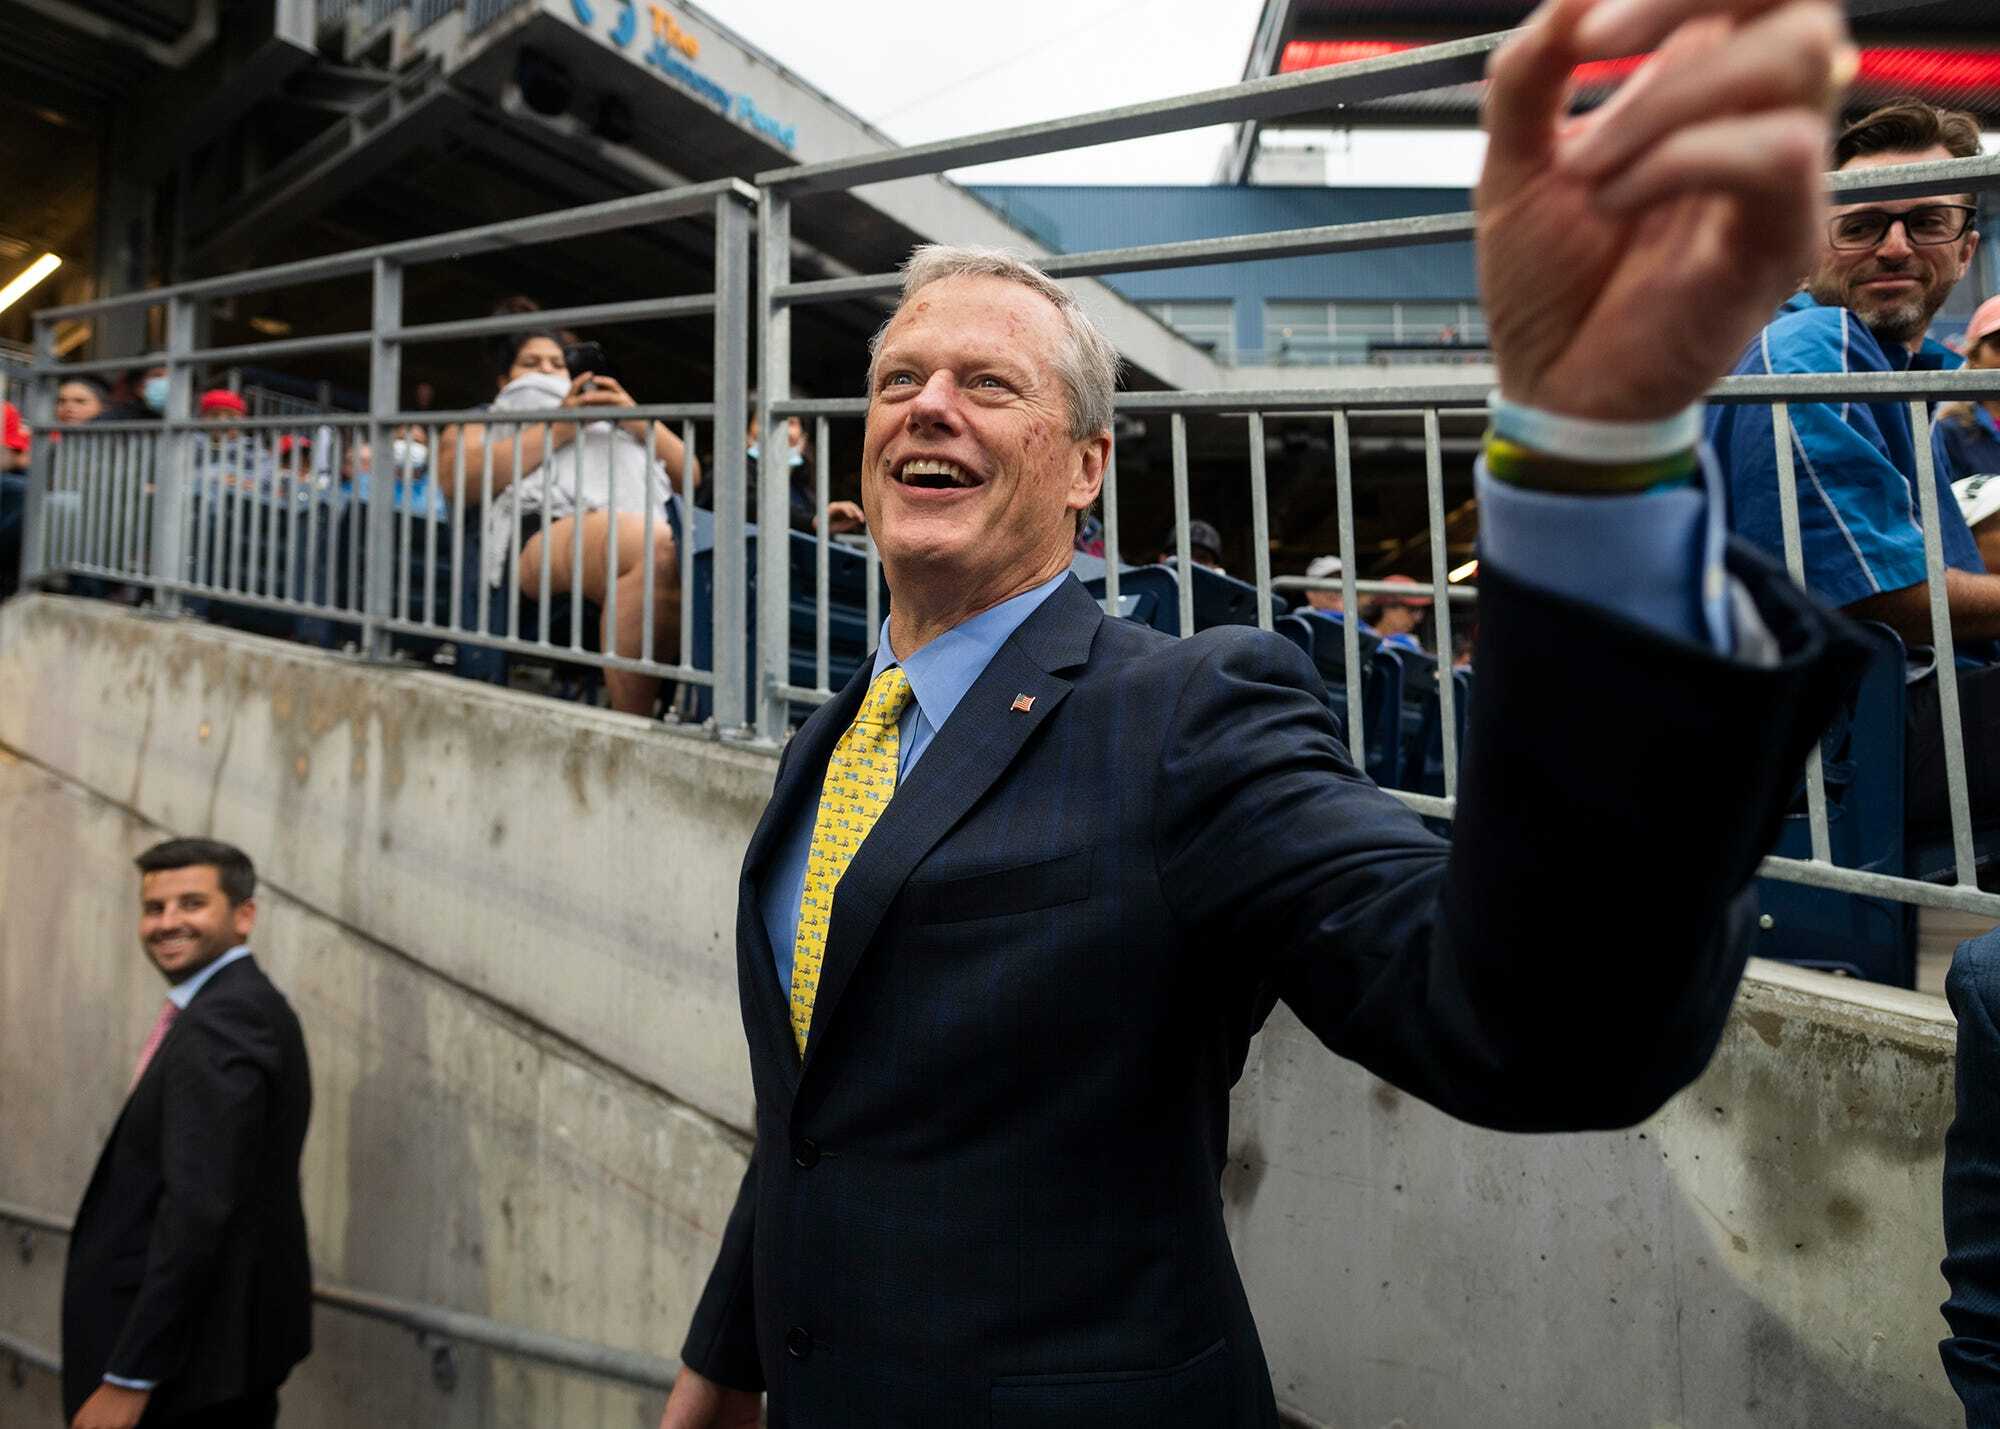 Former Gov. of Massachusetts and new NCAA President Charlie Baker walking into tunnel during sporting event